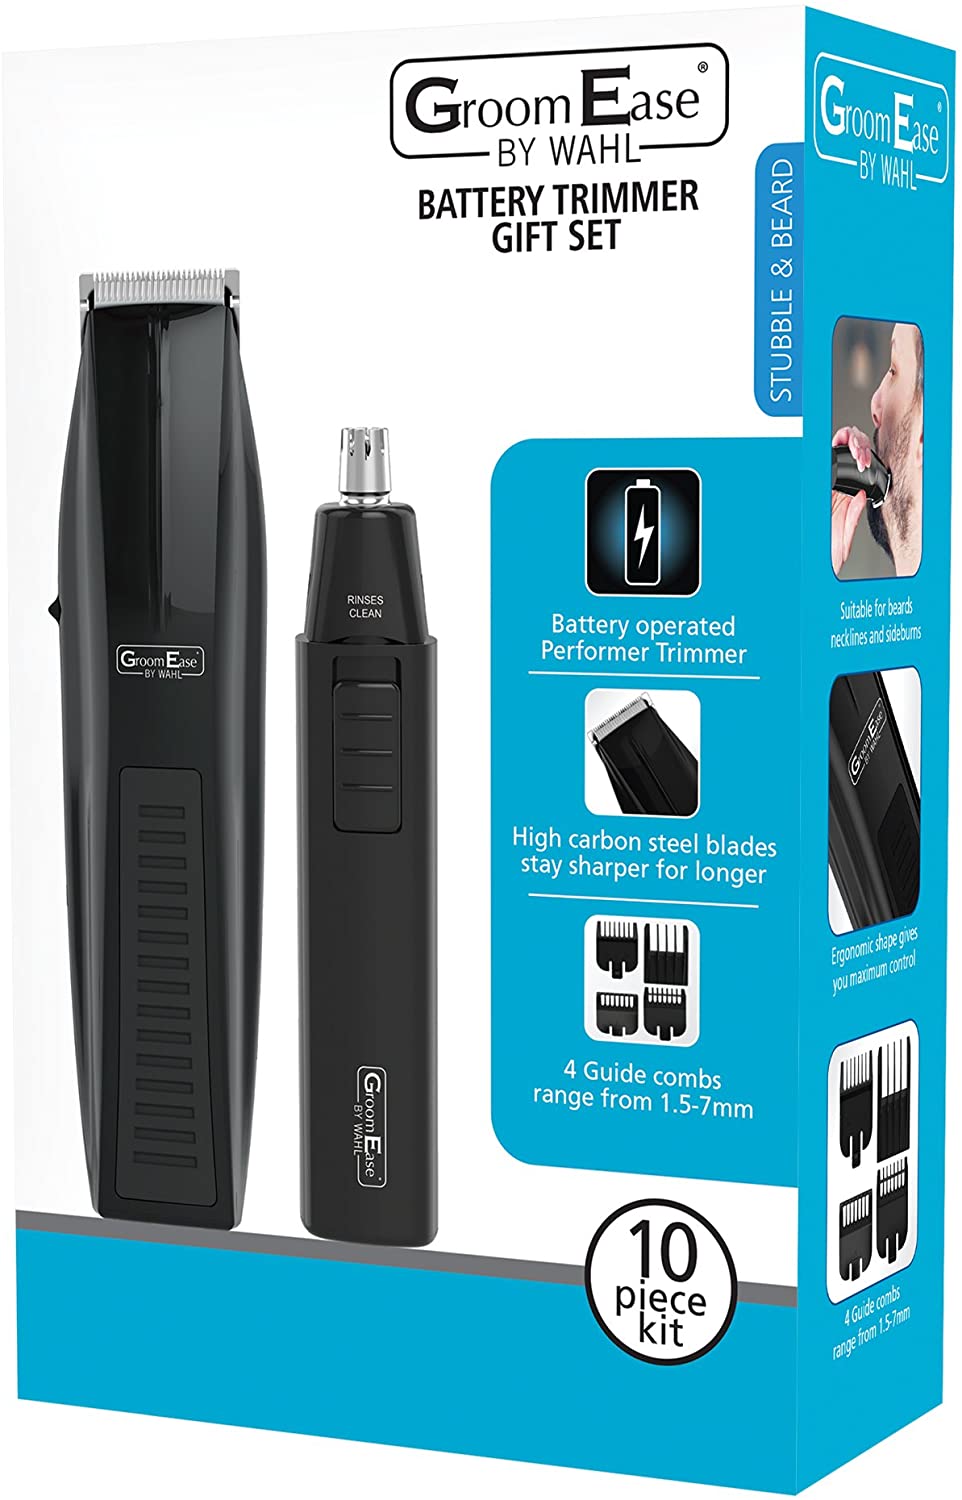 Wahl : Gift Set Battery Trimmer & Personal Trimmer